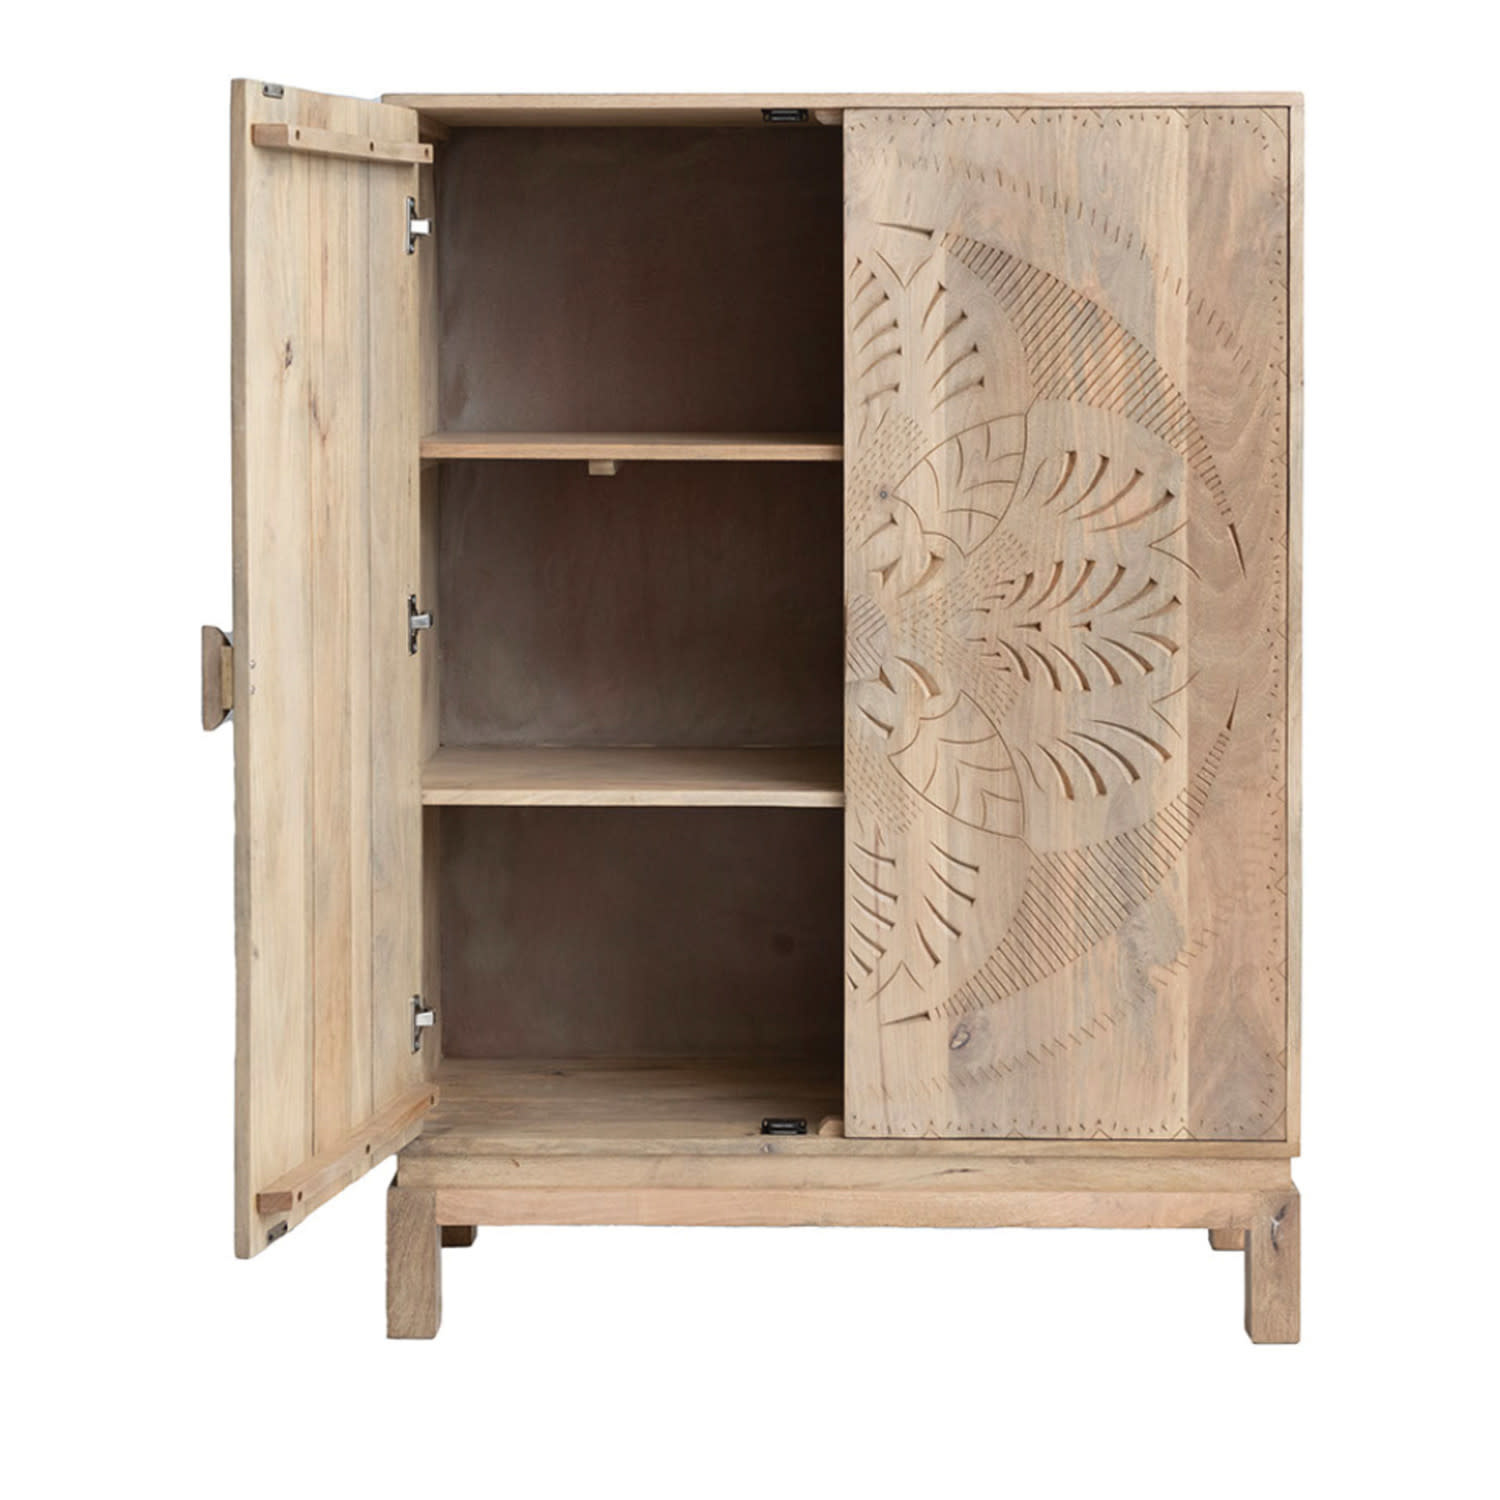 Carved Mango Wood Cabinet  39 x 16 x 54 Furniture Available for Local Delivery or Pick Up